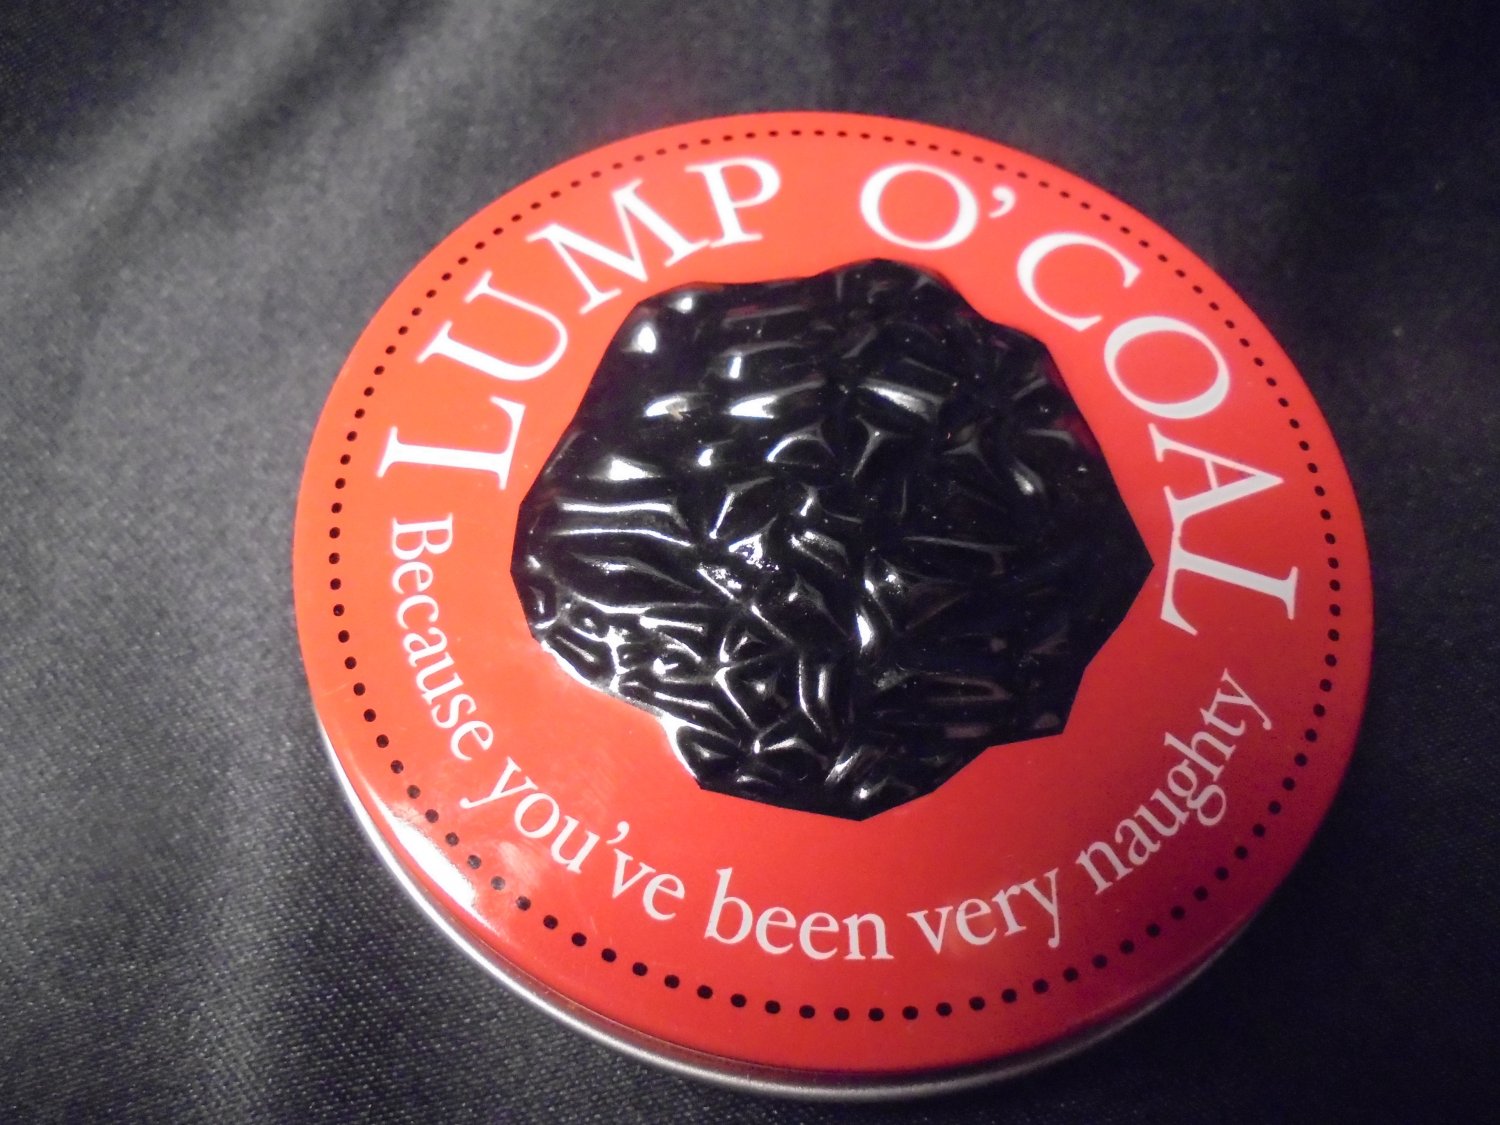 \Congratulations! You made The NAUGHTY LIST!! OFFICIAL "LUMP OF COAL"! $6.00